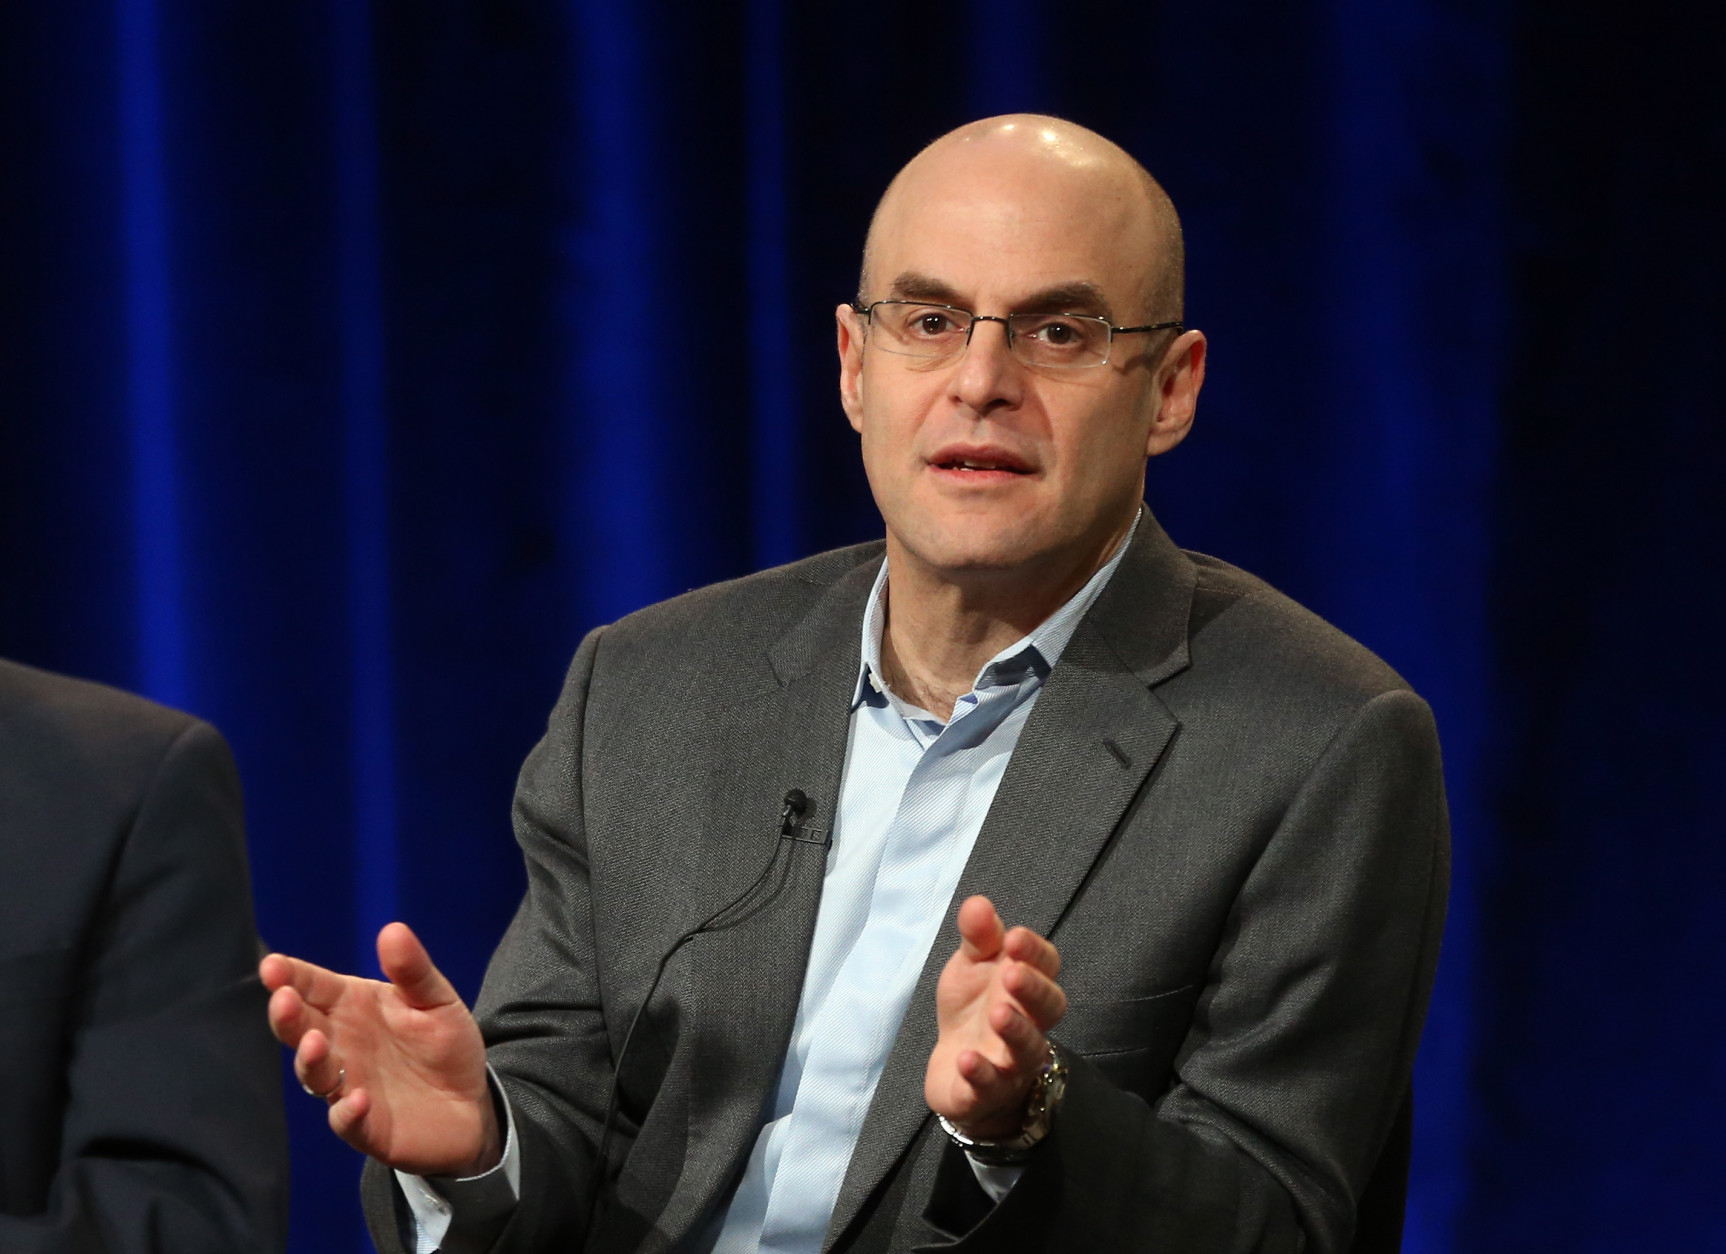 PASADENA, CA - JANUARY 14:  Host Peter Sagal of "Constitution USA" speaks onstage during the PBS portion of the 2013 Winter Television Critics Association Press Tour at the Langham Huntington Hotel &amp; Spa on January 14, 2013 in Pasadena, California.  (Photo by Frederick M. Brown/Getty Images)